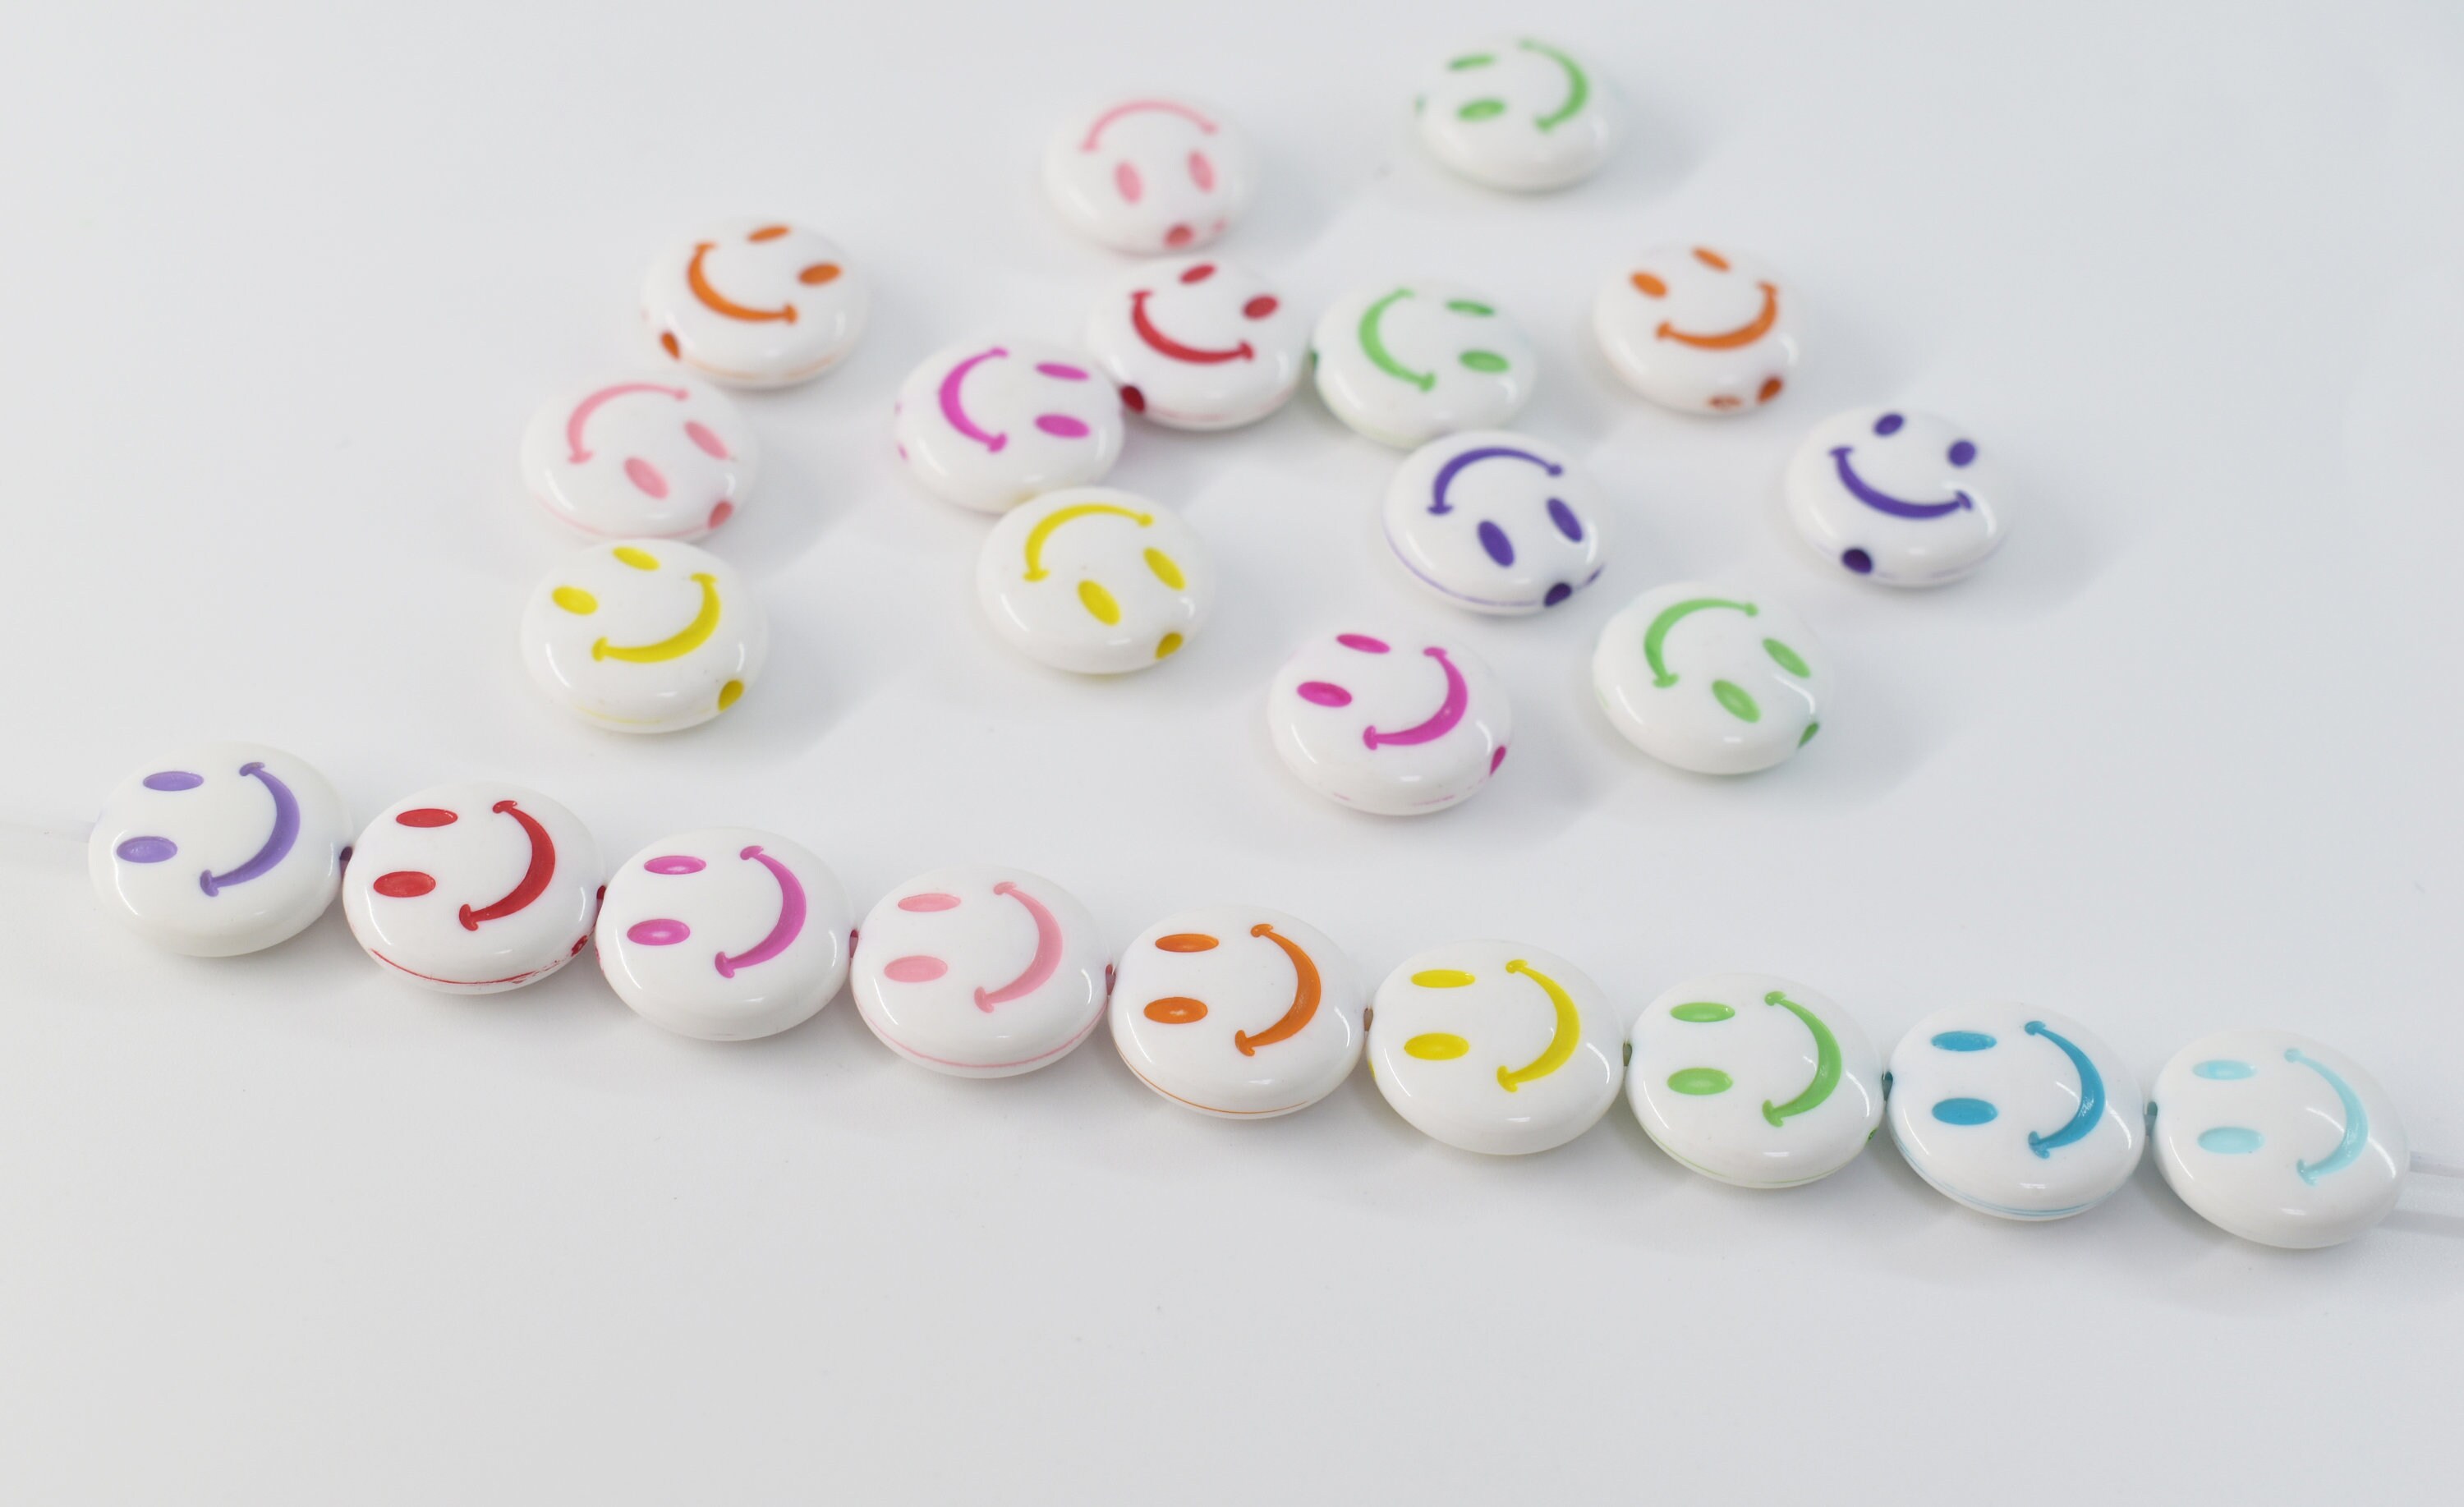 30 14mm Orange and White Smiling Star Plastic Shank Buttons – Smileyboy  Beads